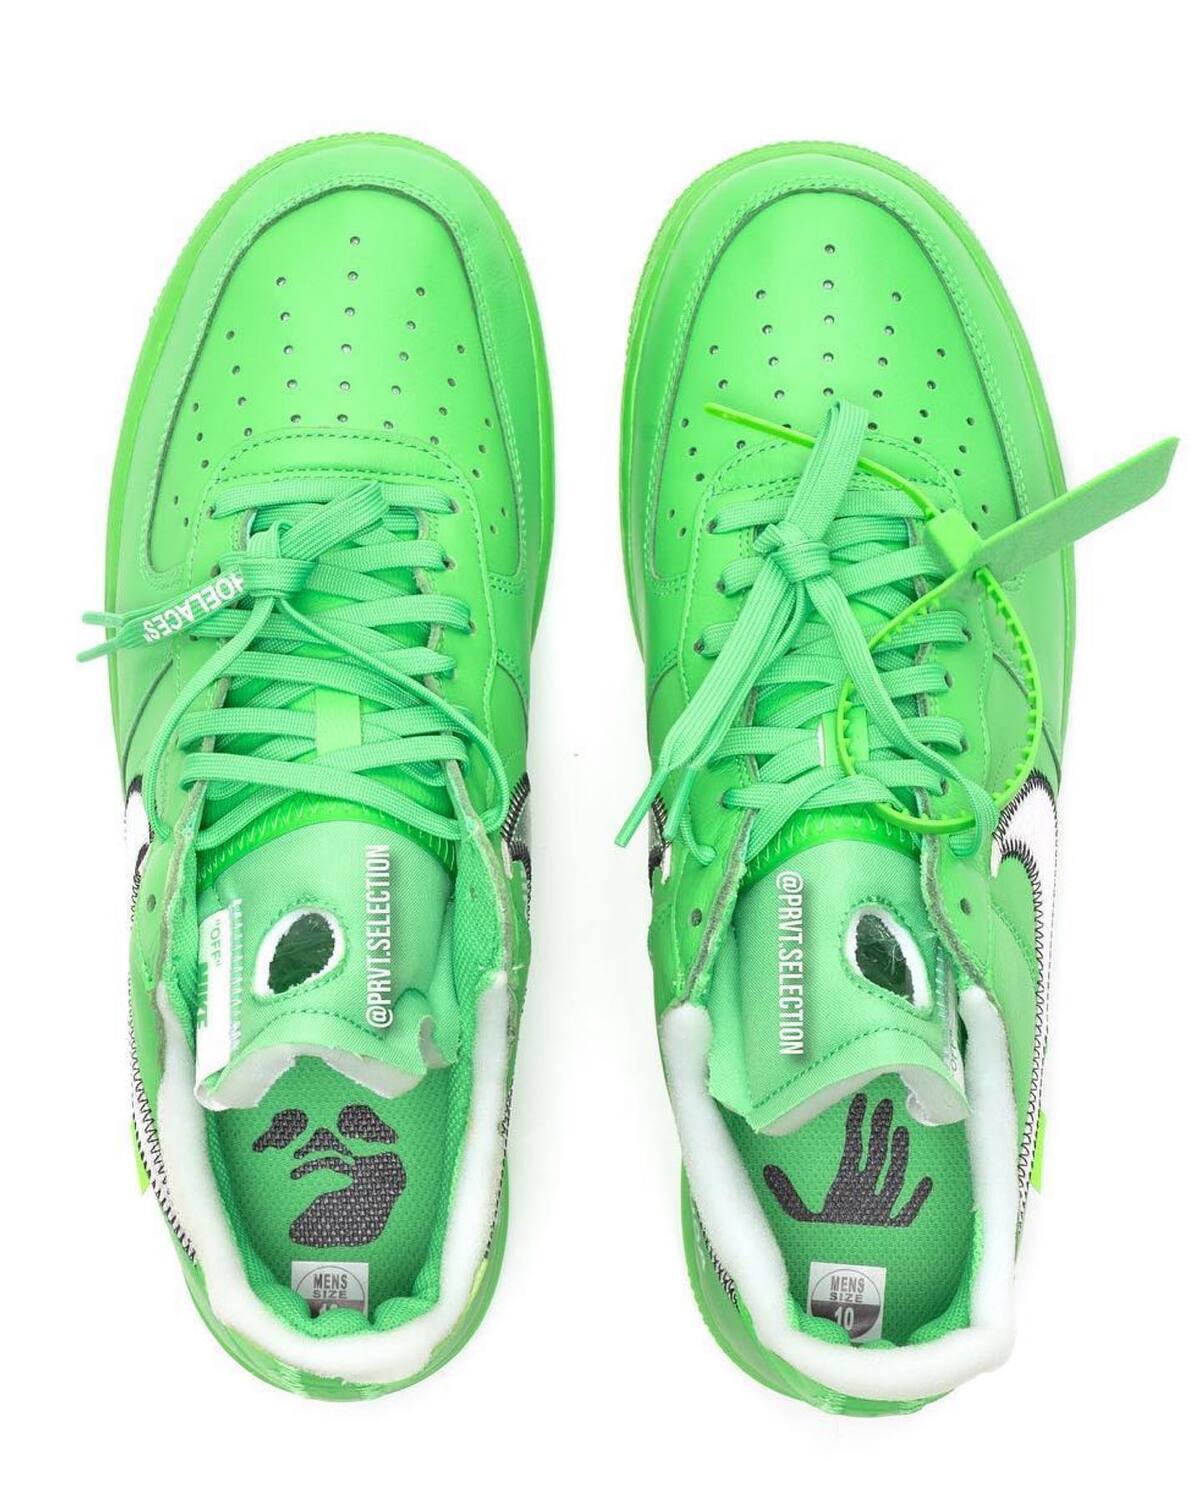 Off-White x Nike Air Force 1 “Green” Set to Release this Summer – PAUSE ...